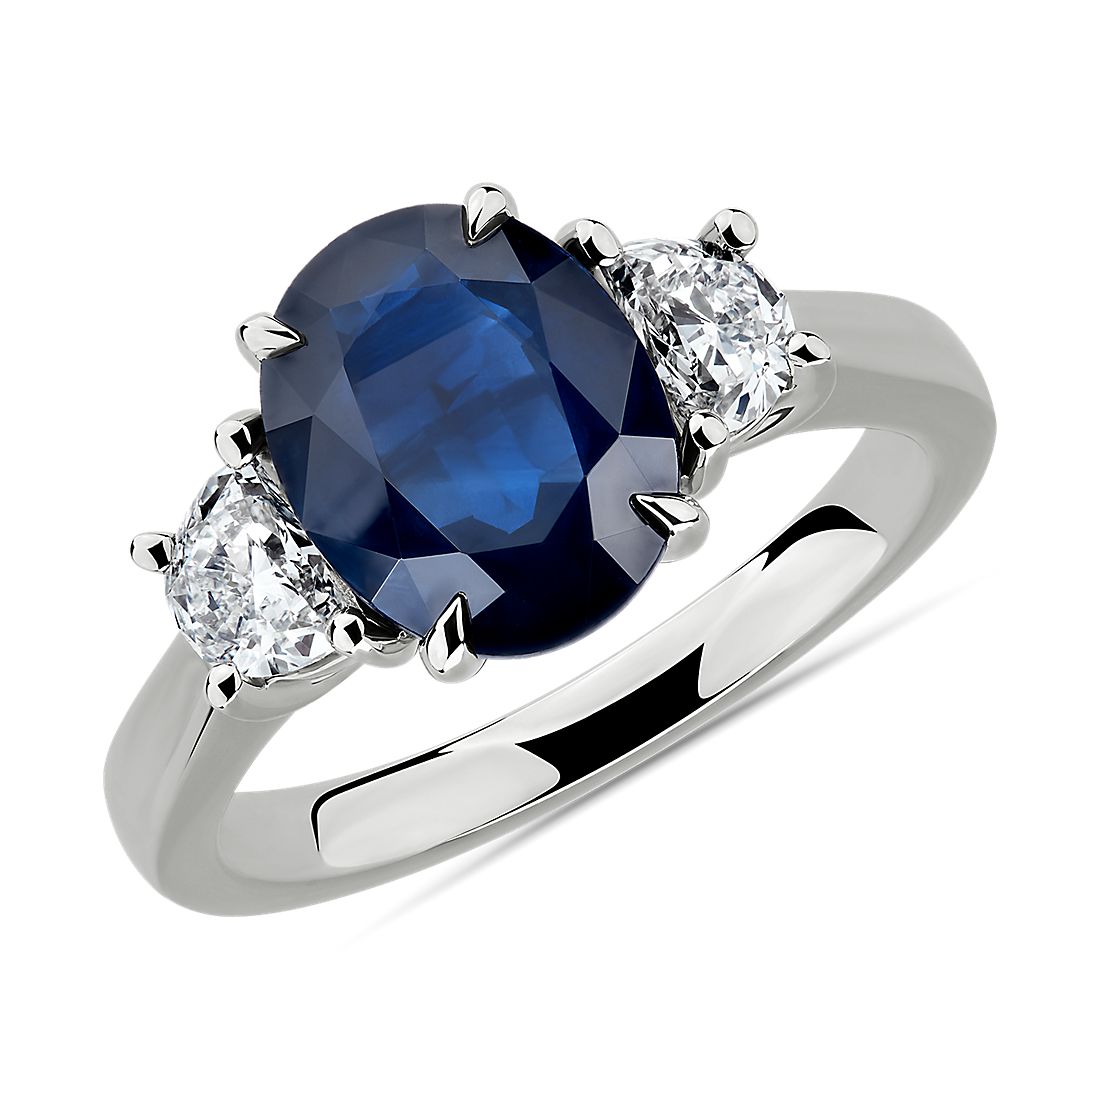 Oval Sapphire and Diamond Ring in Platinum (10x8mm)